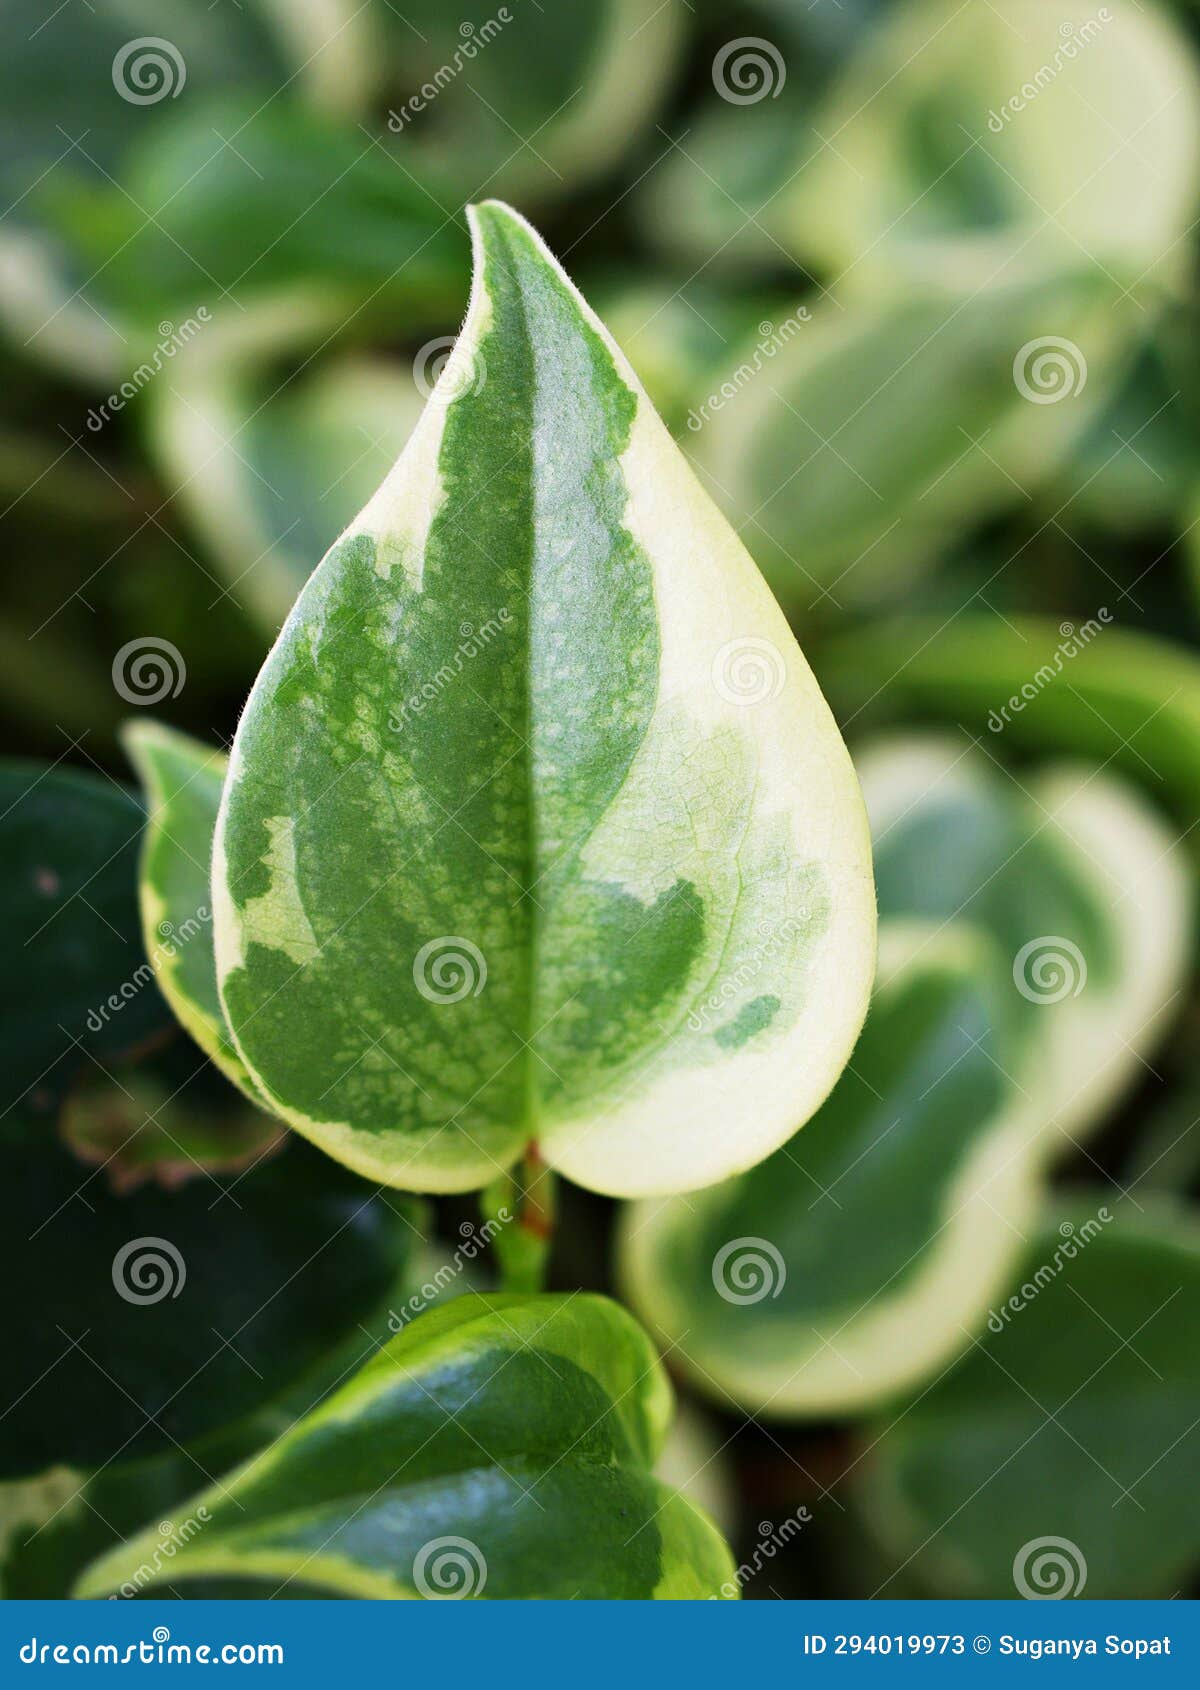 Closeup Green Foliage Leaves Peperomia Scandens Serpens Variegated ,Cupid  Peperomia ,Piper Stock Image - Image of detail, closeup: 294019973